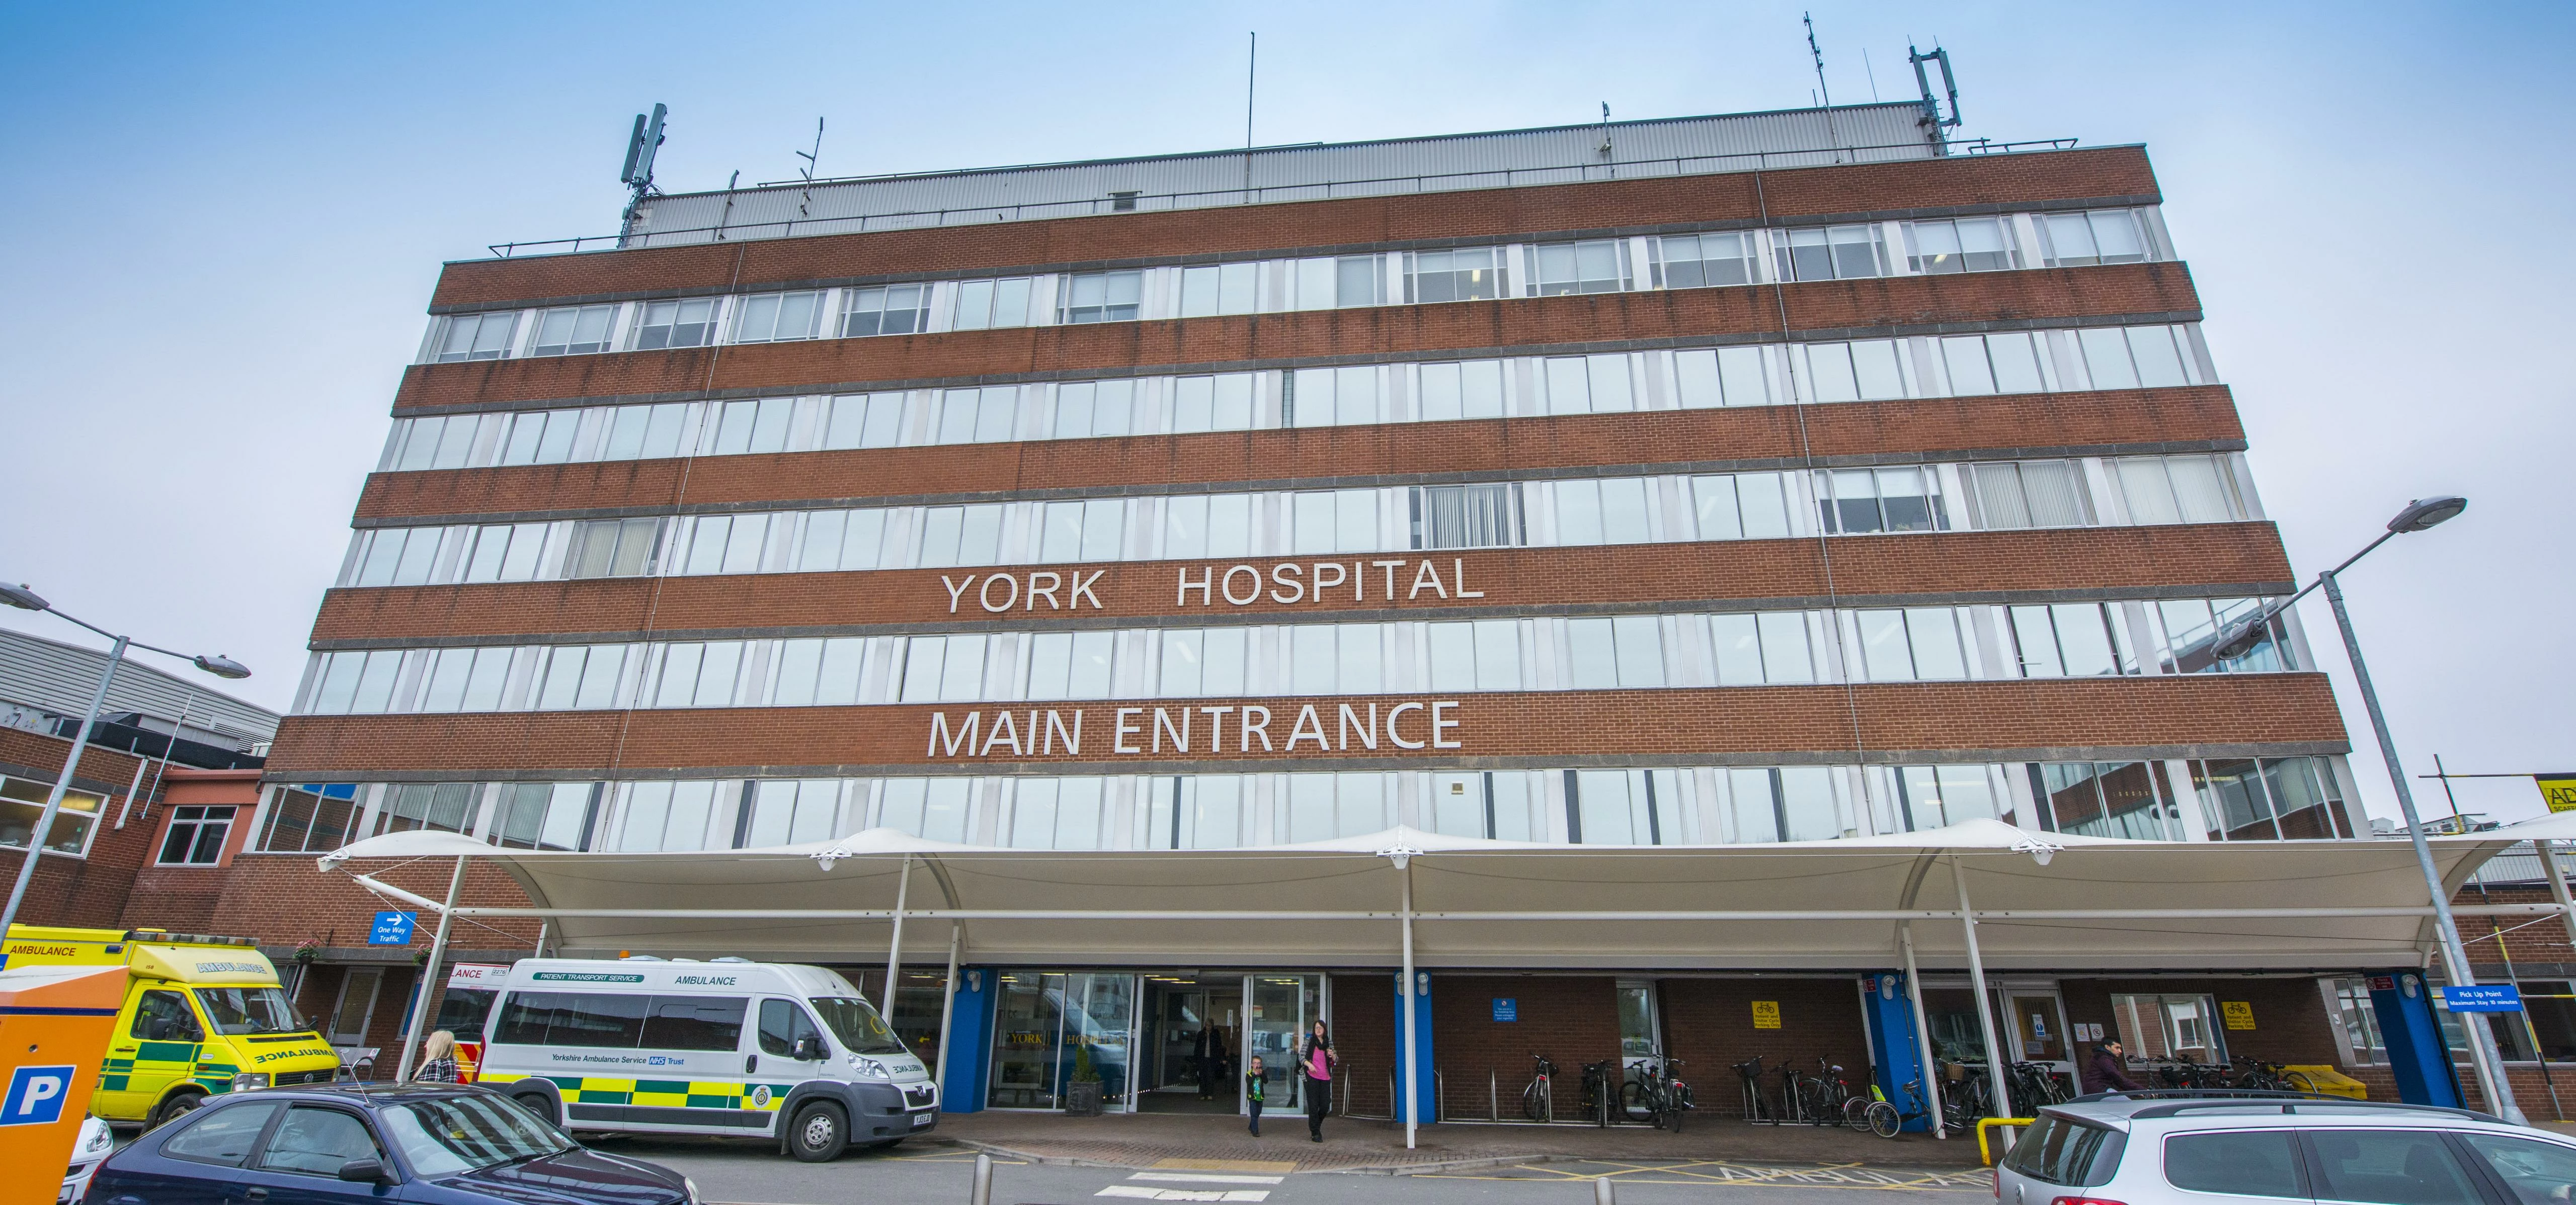 York Teaching Hospital now has significantly lower energy costs and carbon emissions